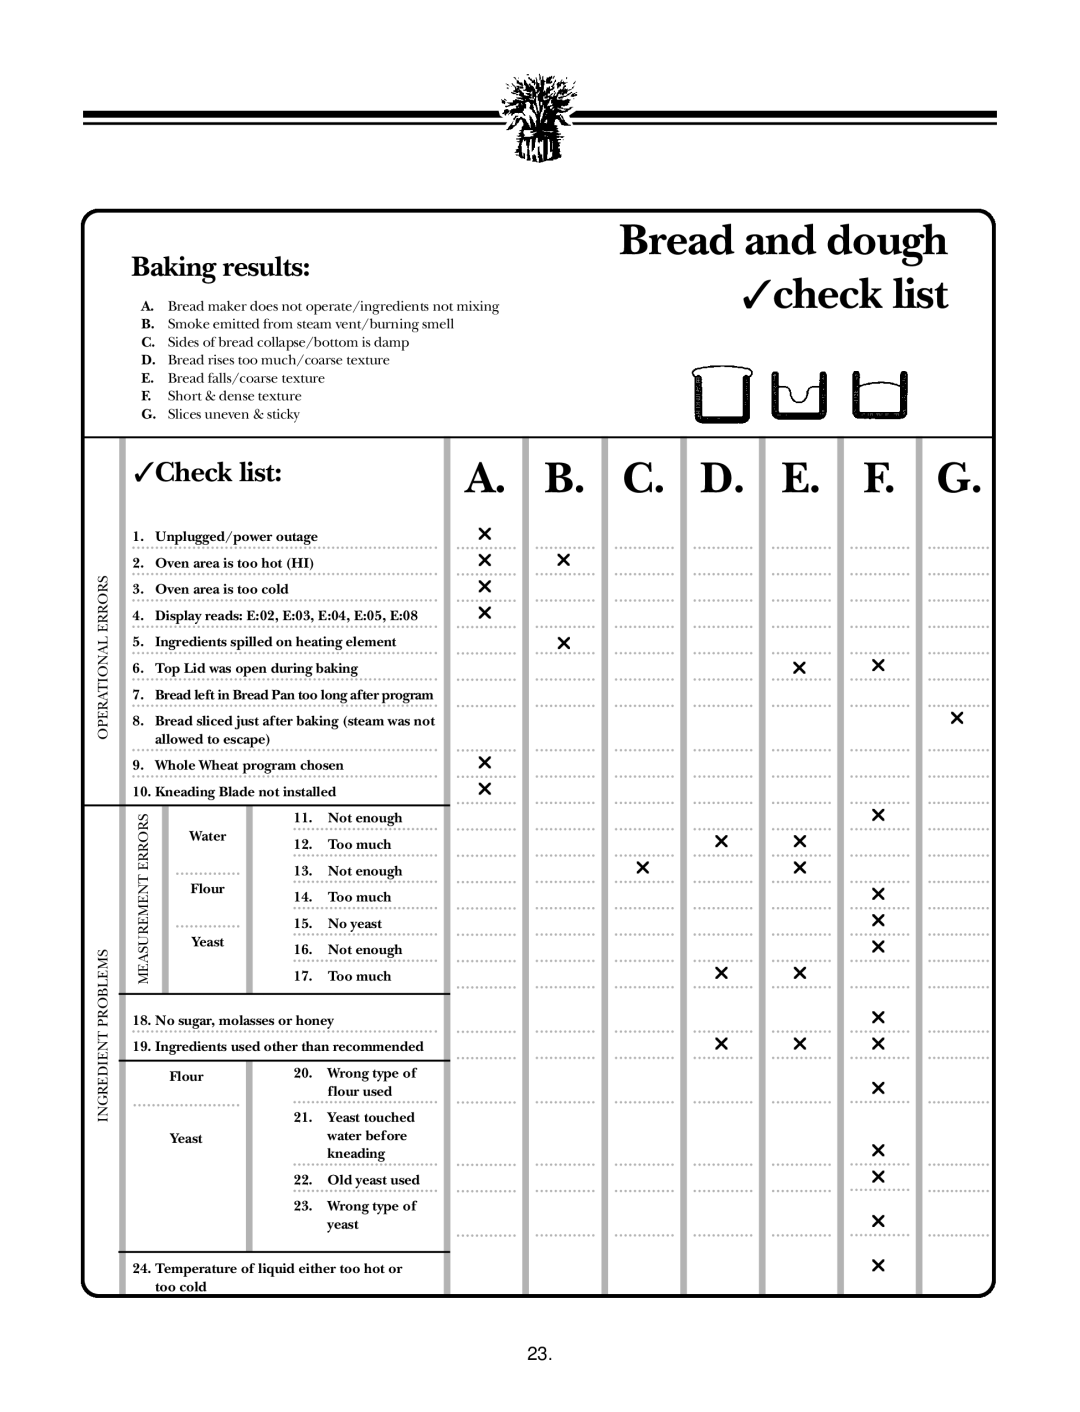 Breadman TR888 instruction manual Bread and dough check list, C. D, Baking results, Check list 